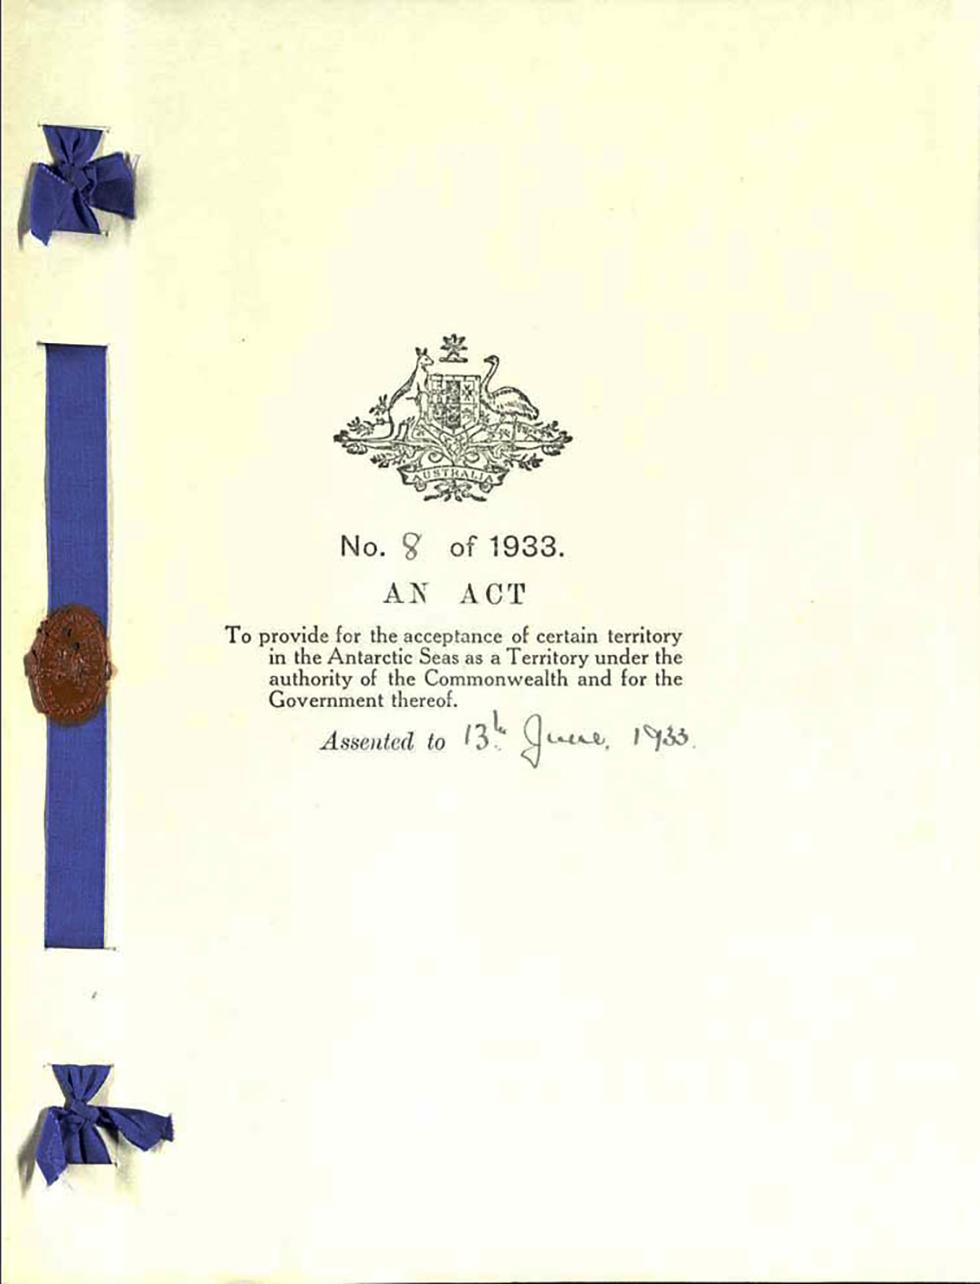 An Act to provide for the acceptance of certain territory in the Antarctic Seas as a Territory under the authority of the Commonwealth and for the Government thereof.